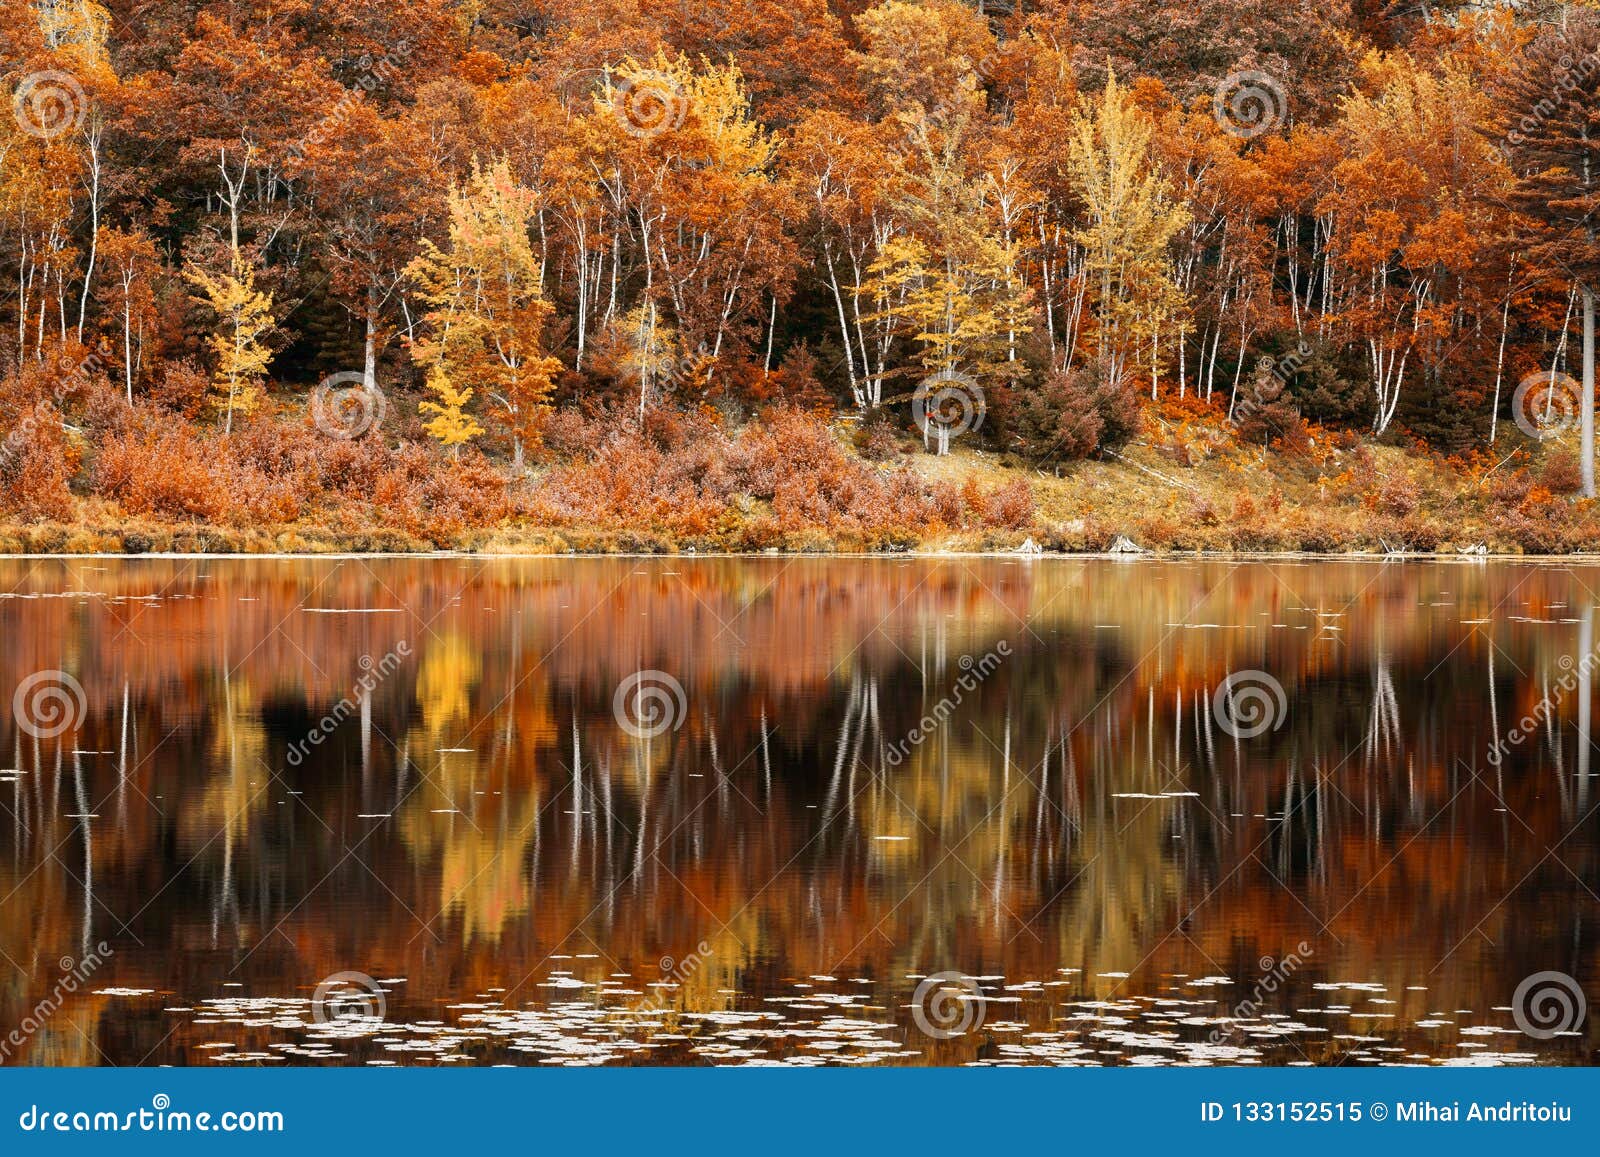 Fall Foliage Reflection In Jordan Pond Maine Stock Image Image Of